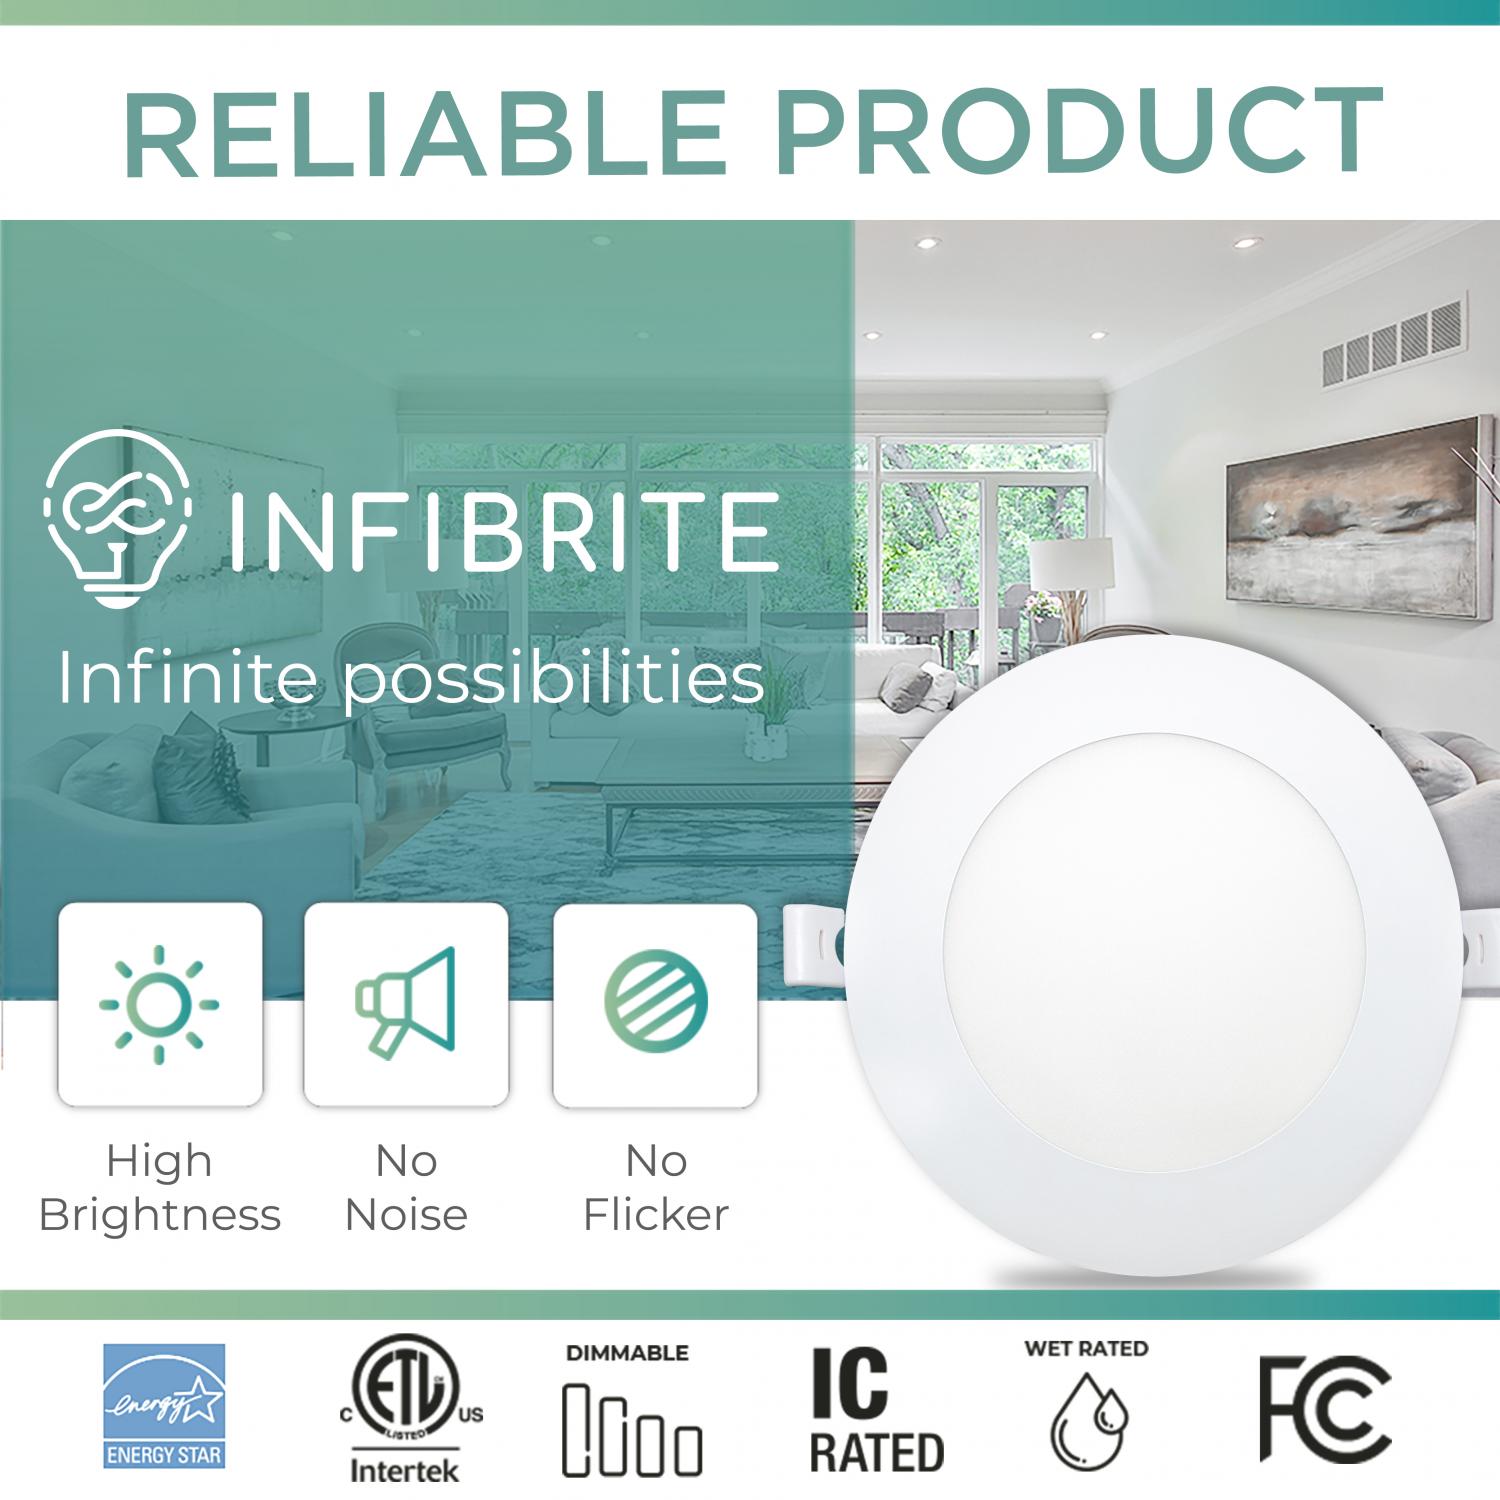 Infibrite 4 Inch 4000K Cool White 9W 750 LM Ultra-Slim LED Ceiling Light with Junction Box, Flush Mount, Dimmable, Fixture for Bedroom, Wet Rated for Bathroom, Easy Install, 75W Eqv, ETL & Energy Star, US Company (24 Pack)